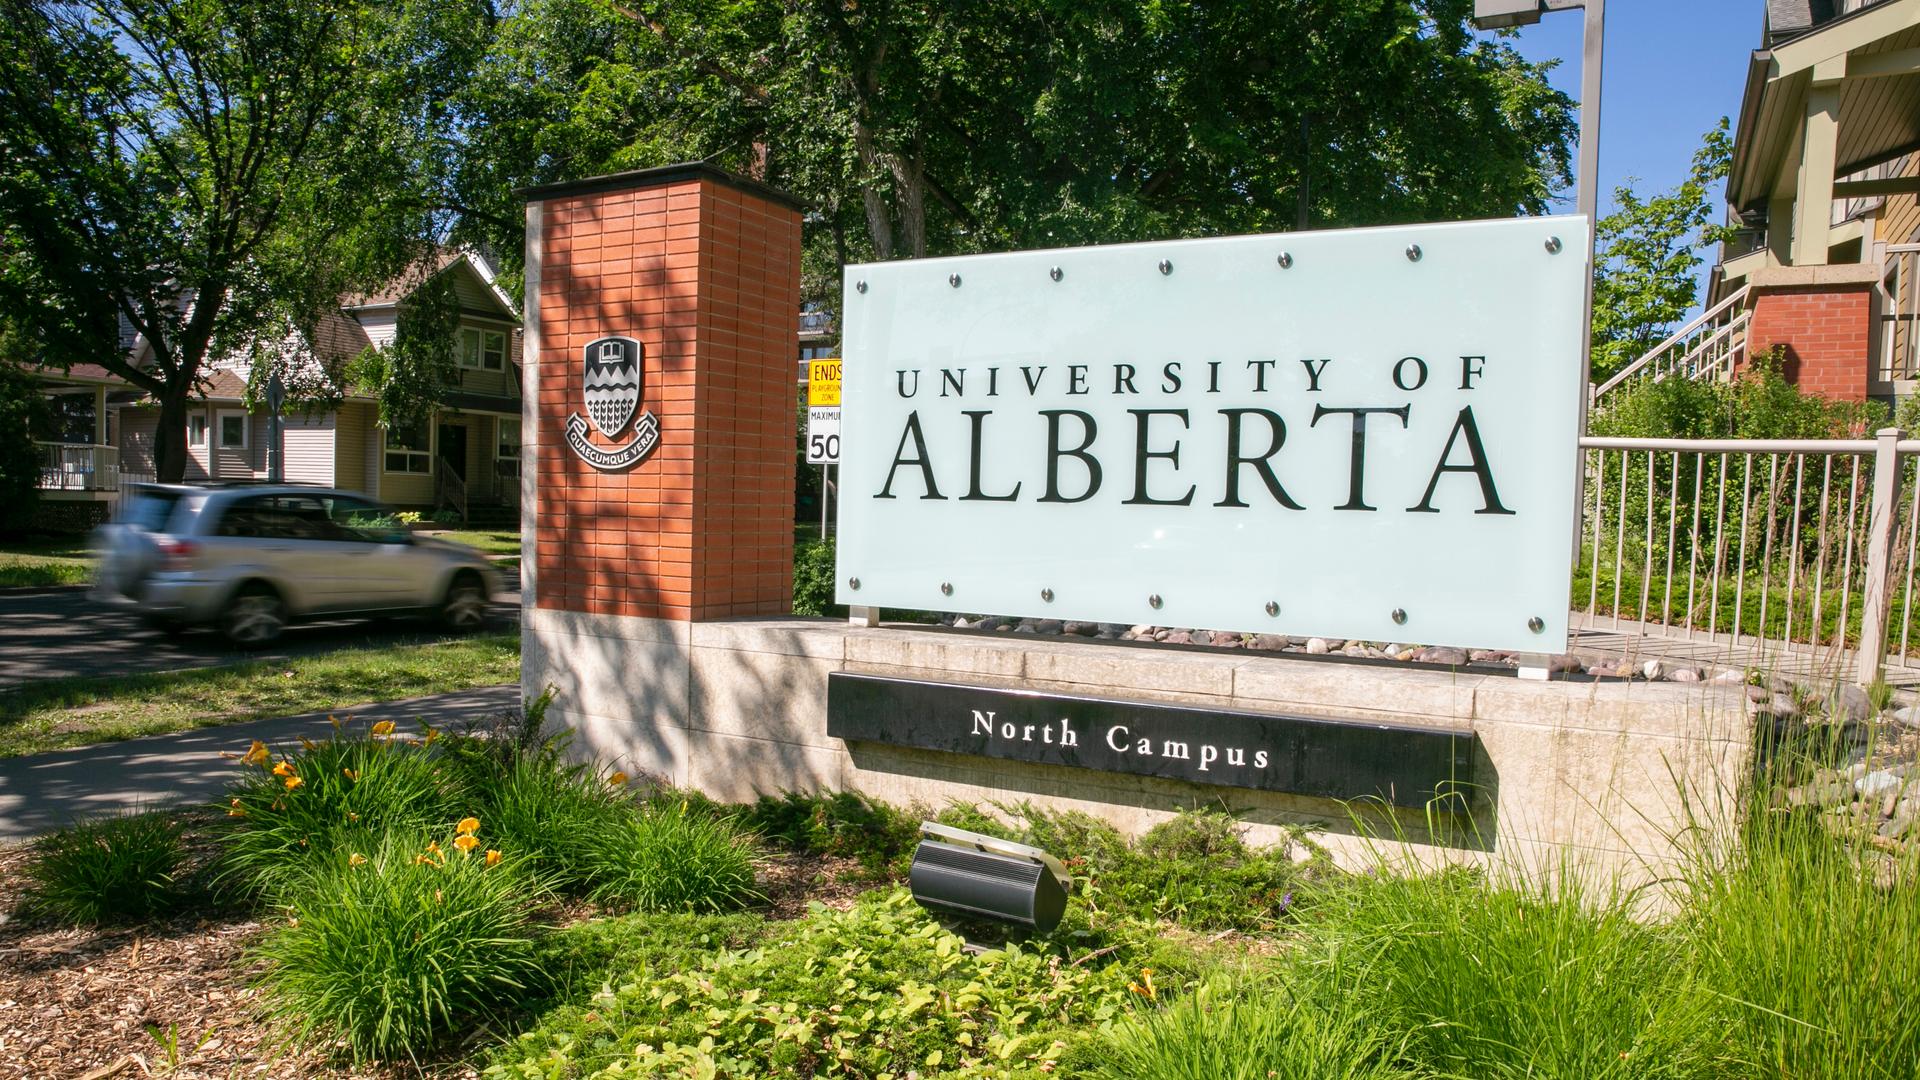 sign for the University of Alberta on the university's campus